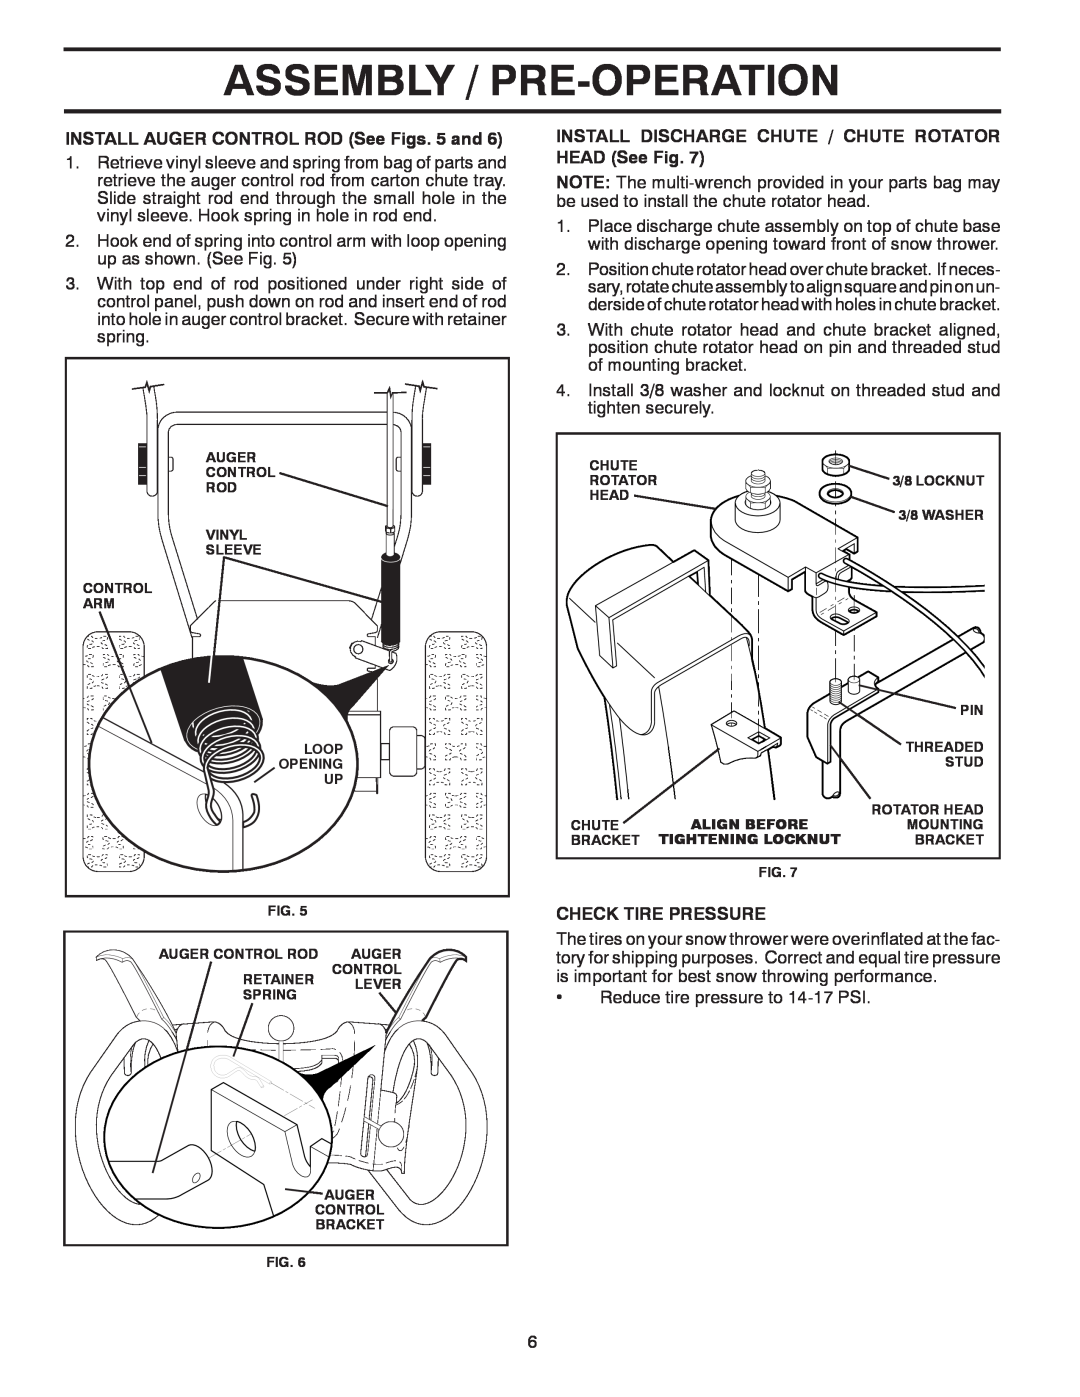 Poulan 437920, 96192004501 Assembly / Pre-Operation, INSTALL AUGER CONTROL ROD See Figs. 5 and, Check Tire Pressure 